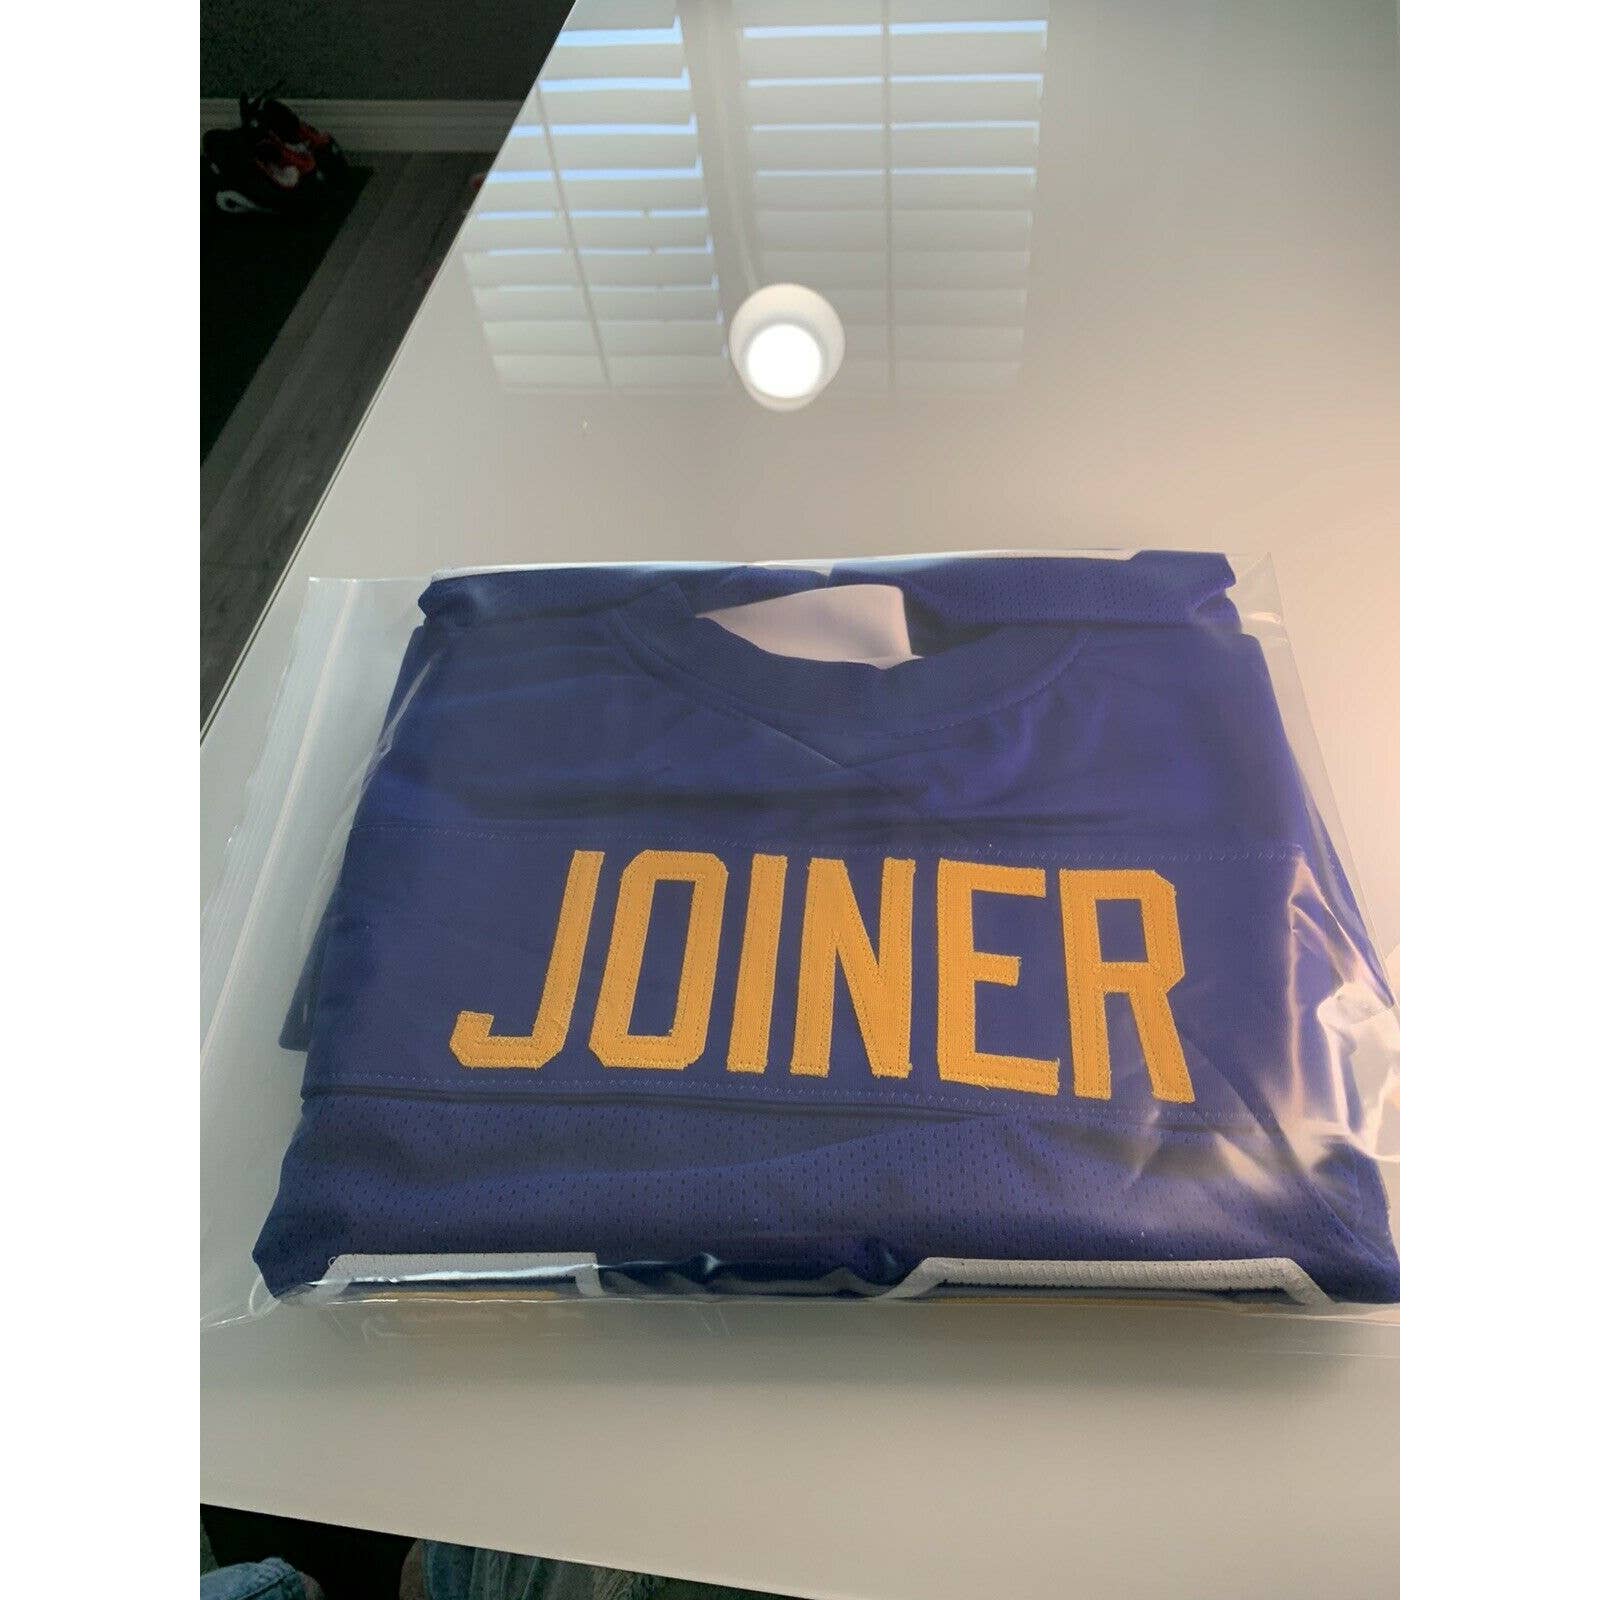 Charlie Joiner Autographed/Signed Jersey JSA San Diego Chargers Los Angeles - TreasuresEvolved